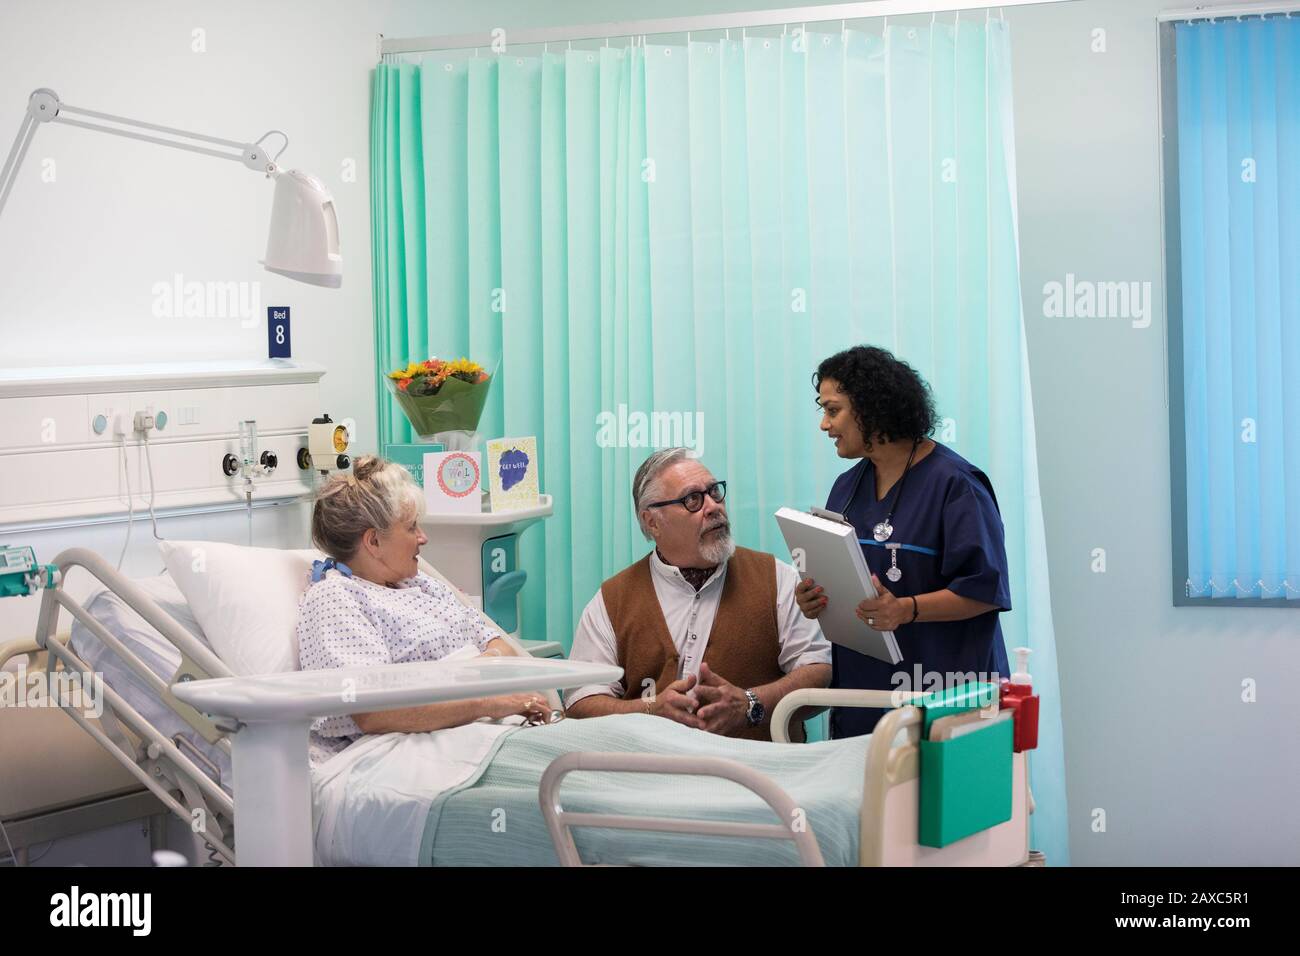 Doctor with medical chart making rounds, talking with senior couple in hospital room Stock Photo